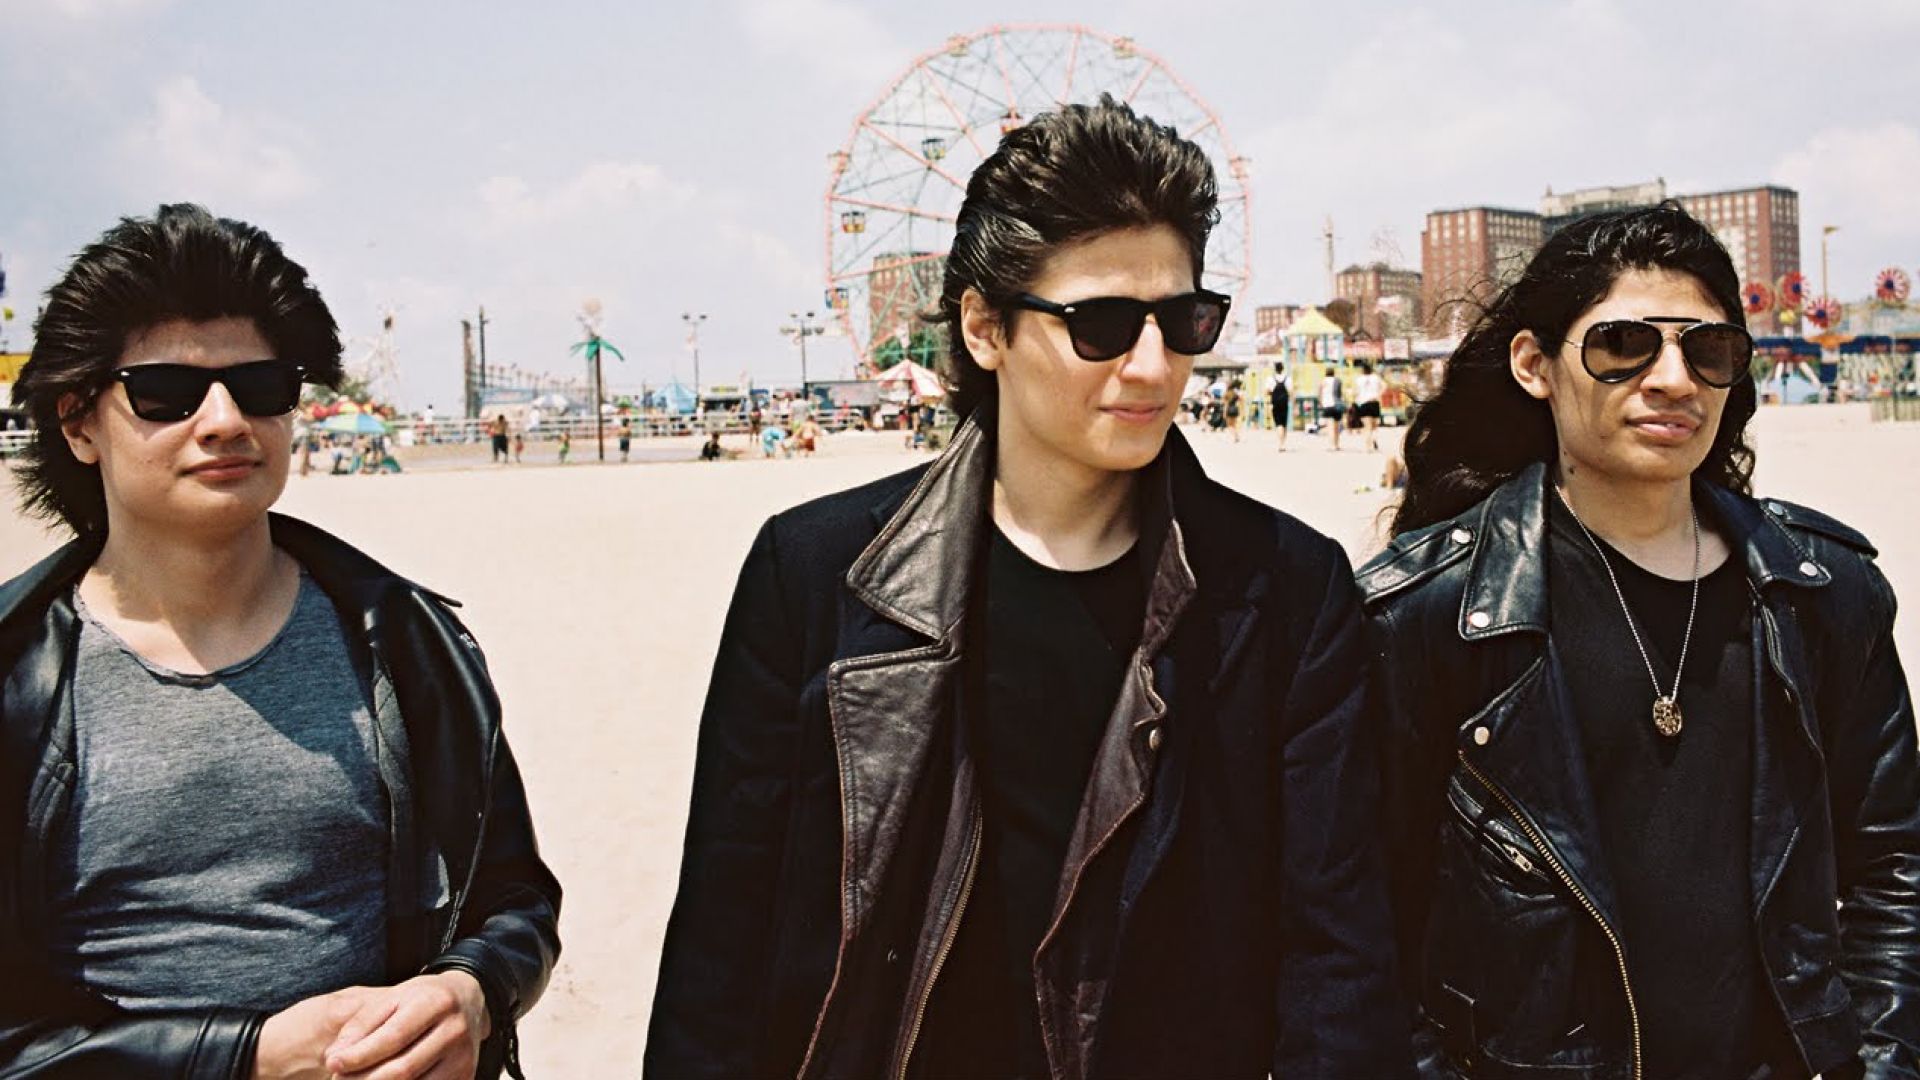 8. The Wolfpack